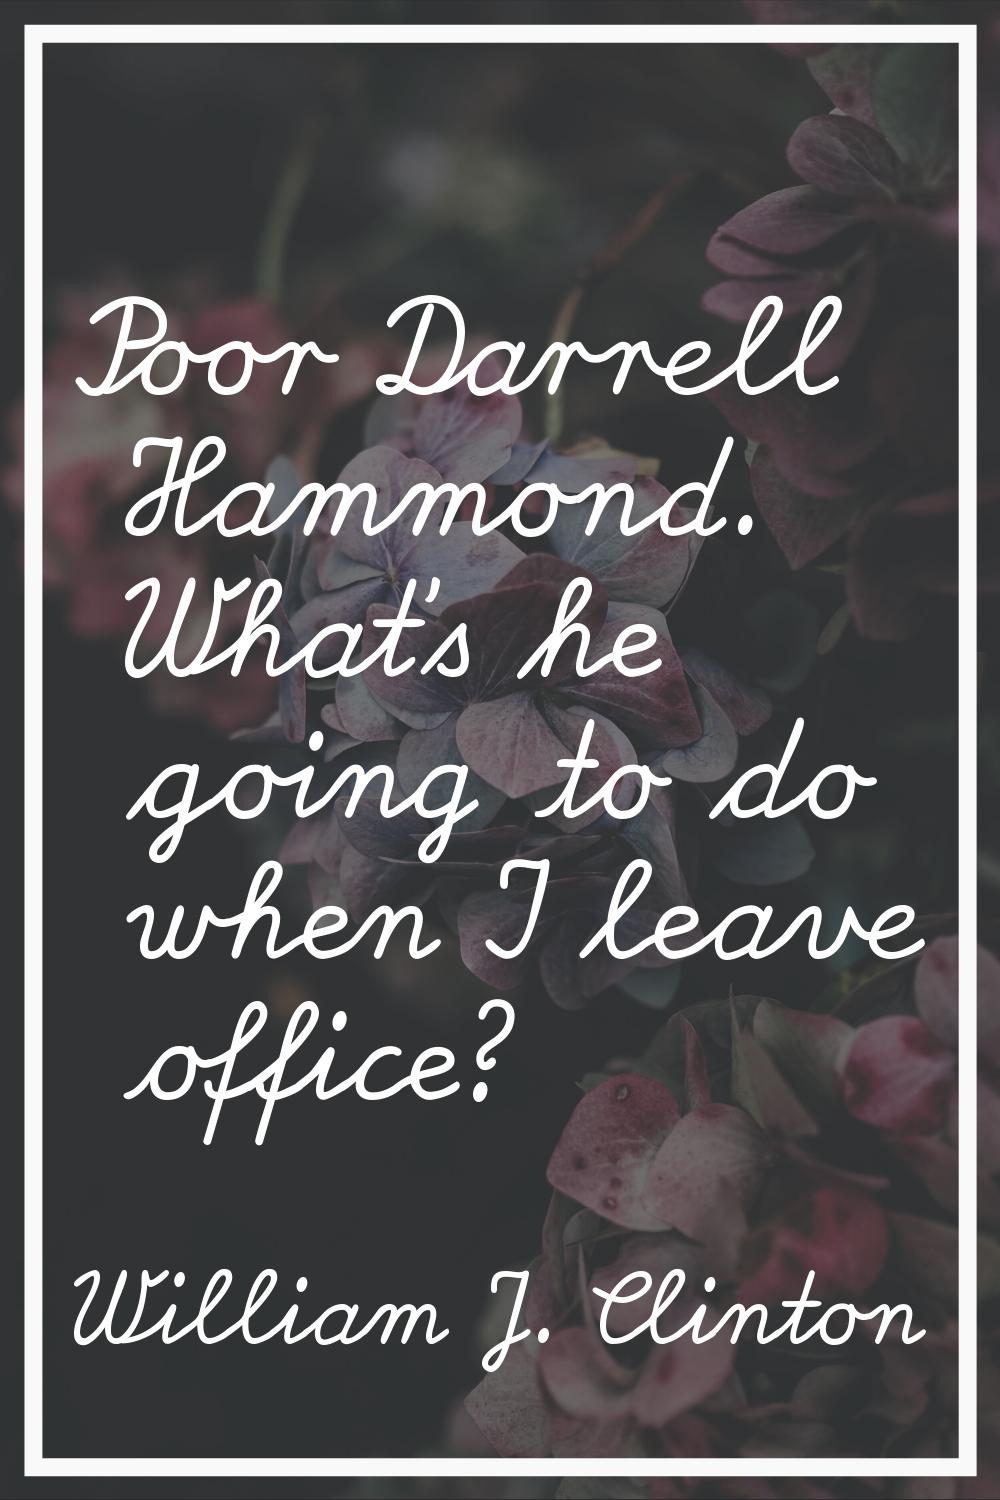 Poor Darrell Hammond. What's he going to do when I leave office?